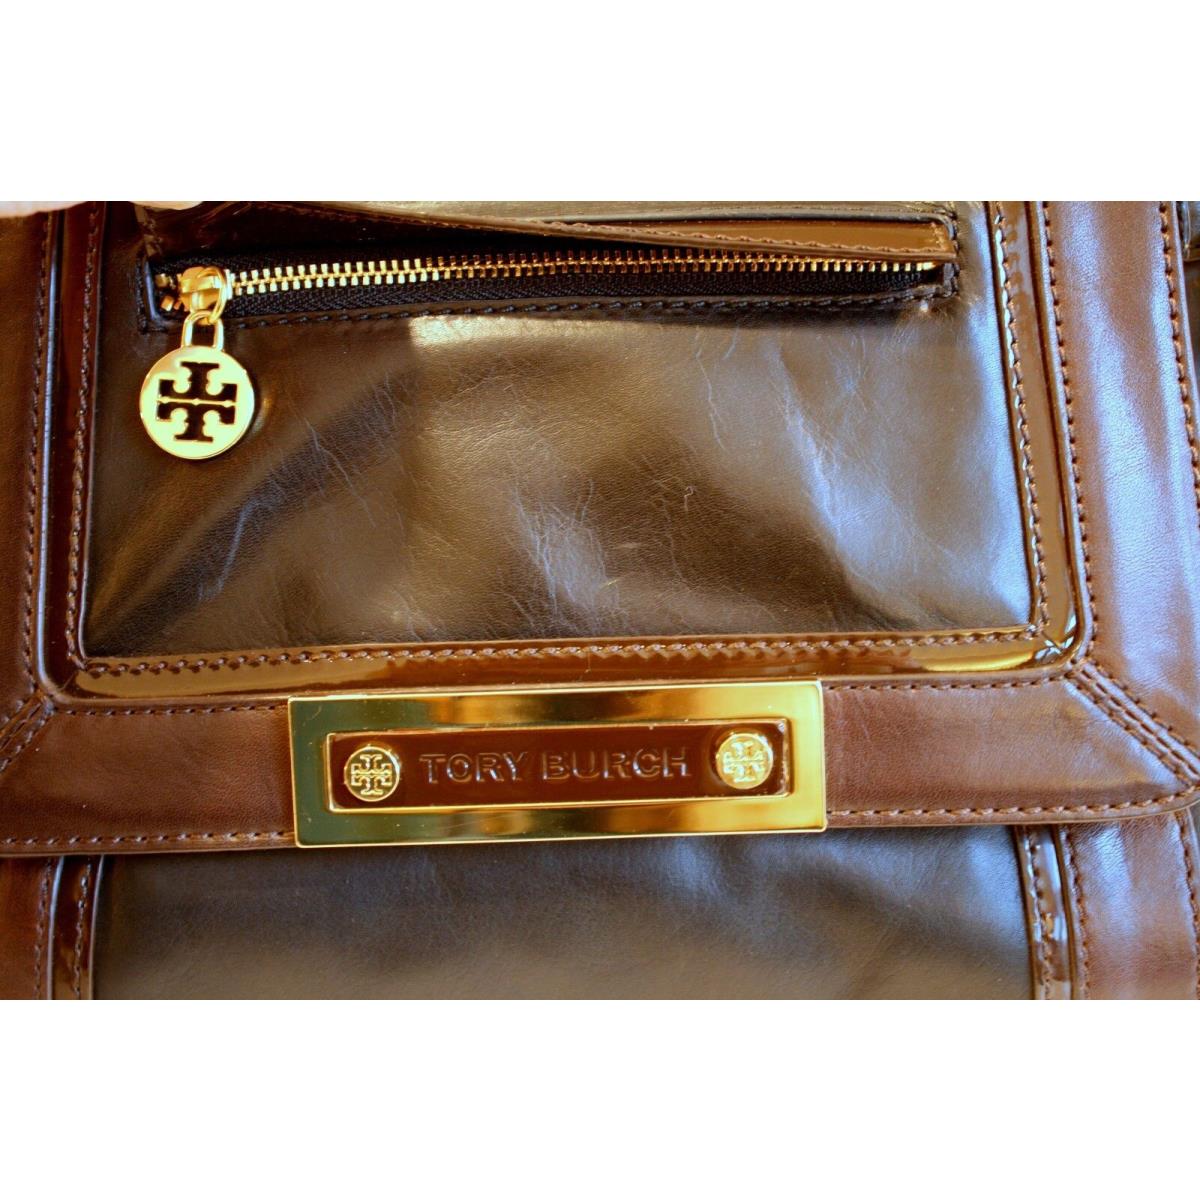 Tory Burch Leather Two Tone Black Brown Small Flap Bag - Tory Burch bag -  036678701680 | Fash Brands